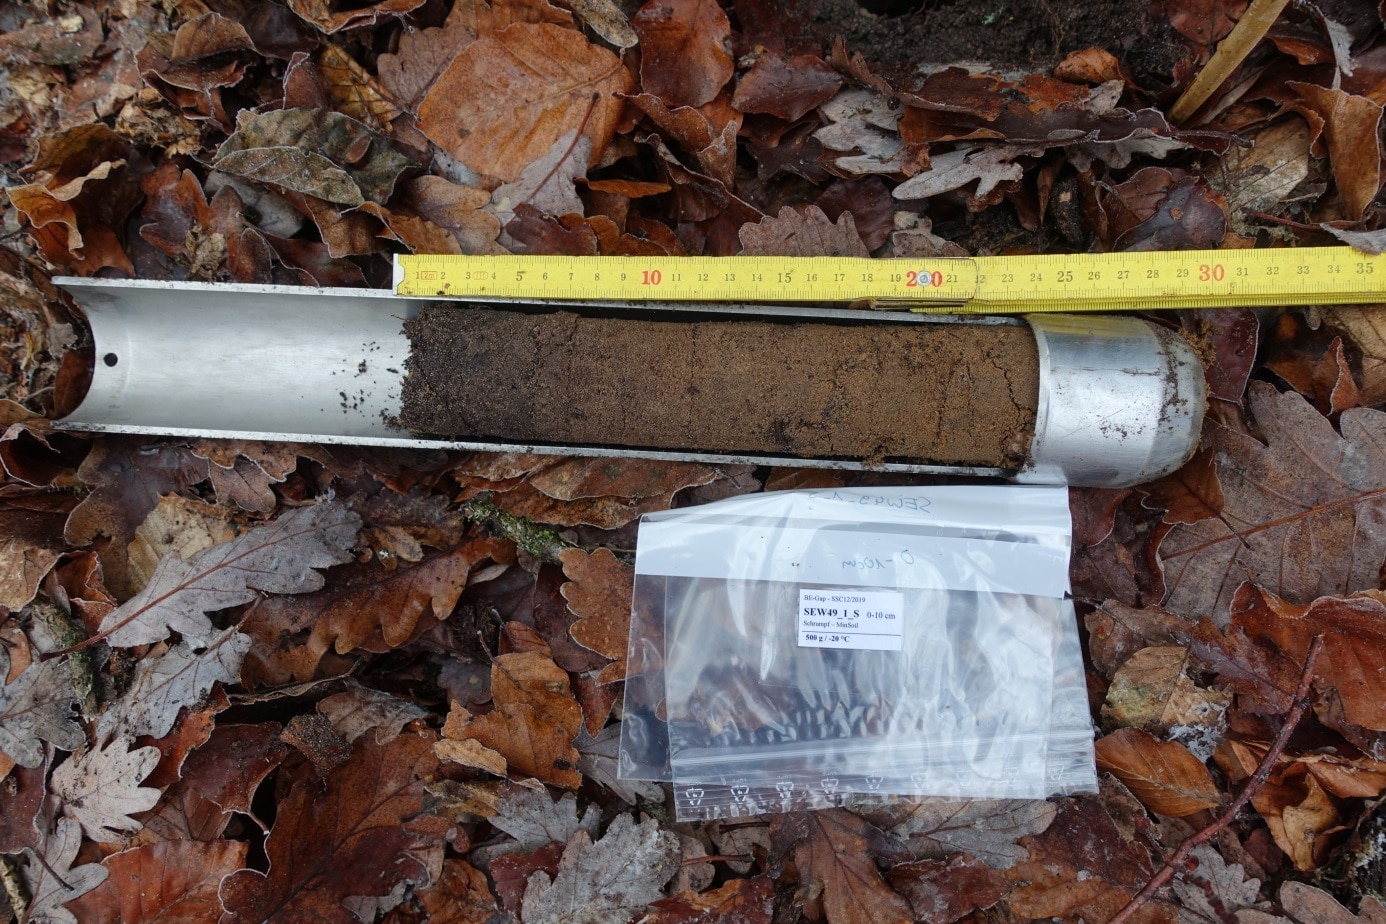 Picture: The photo shows a metal cylinder used for taking soil samples. The cylinder lies on the forest floor, which is covered with brown beech and oak leaves. The cylinder is closed all around only at one end and is otherwise open halfway along its length. Inside the cylinder is a soil sample of brown soil twenty-three centimetres long. Next to the cylinder are a yellow folding ruler and an empty sample bag made of transparent plastic for estimating the length.